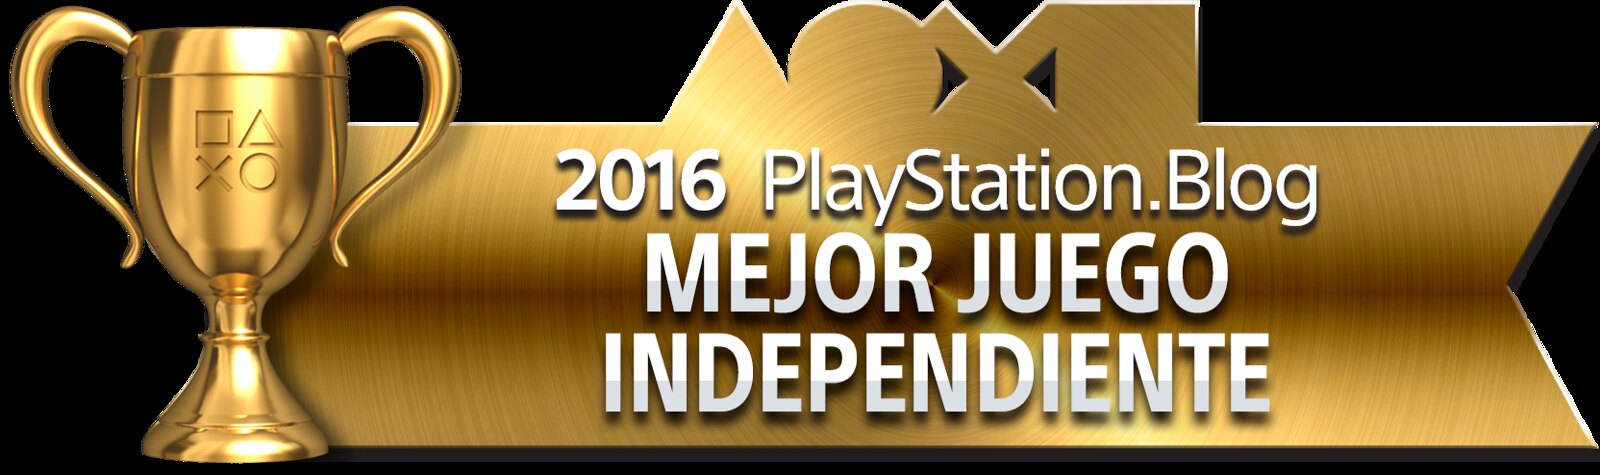 Best Independent Game - Gold